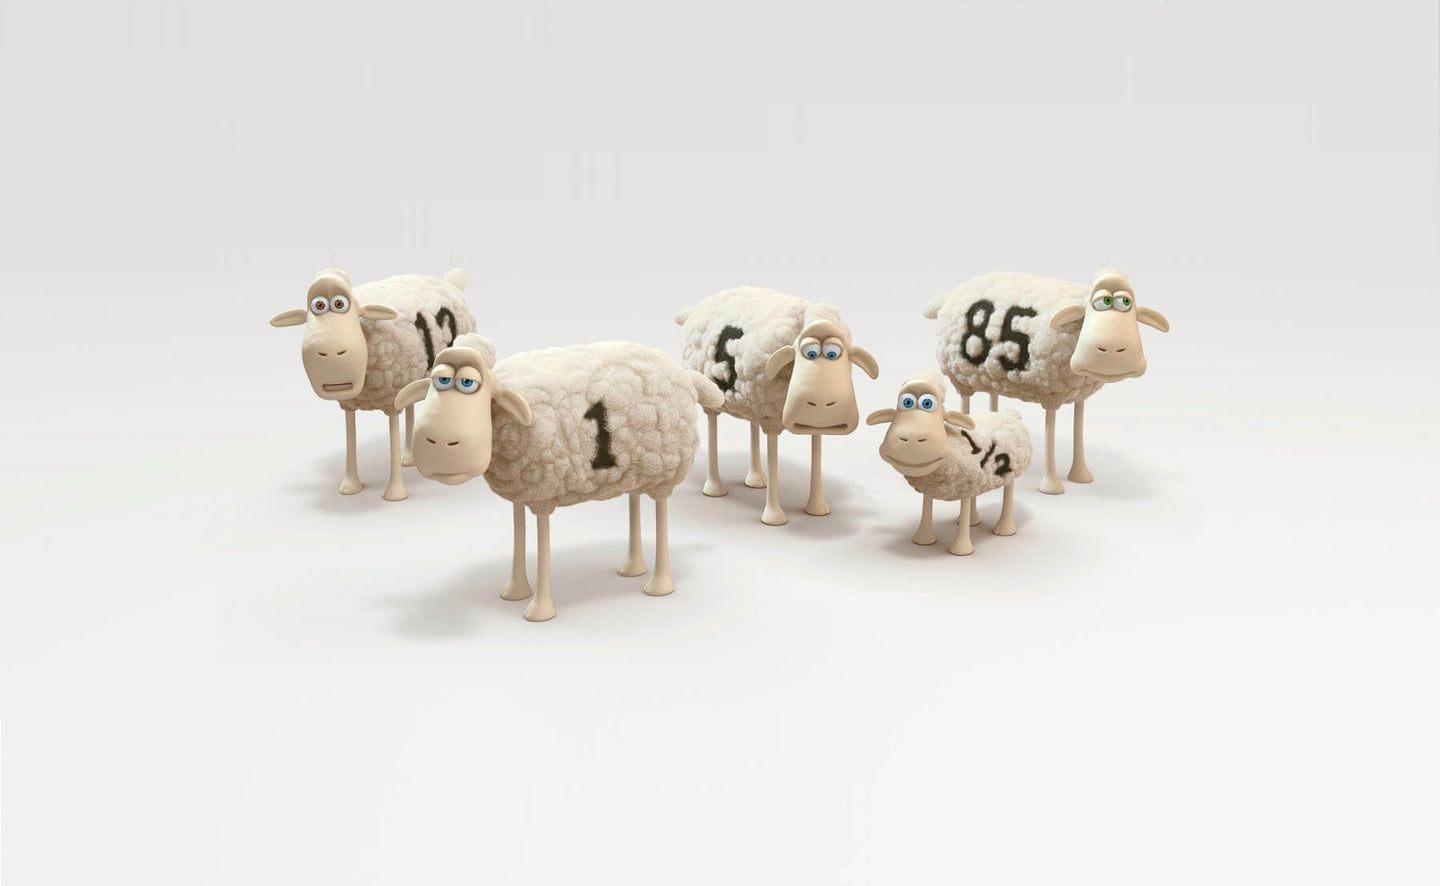 Picture of 5 different Serta Sheep